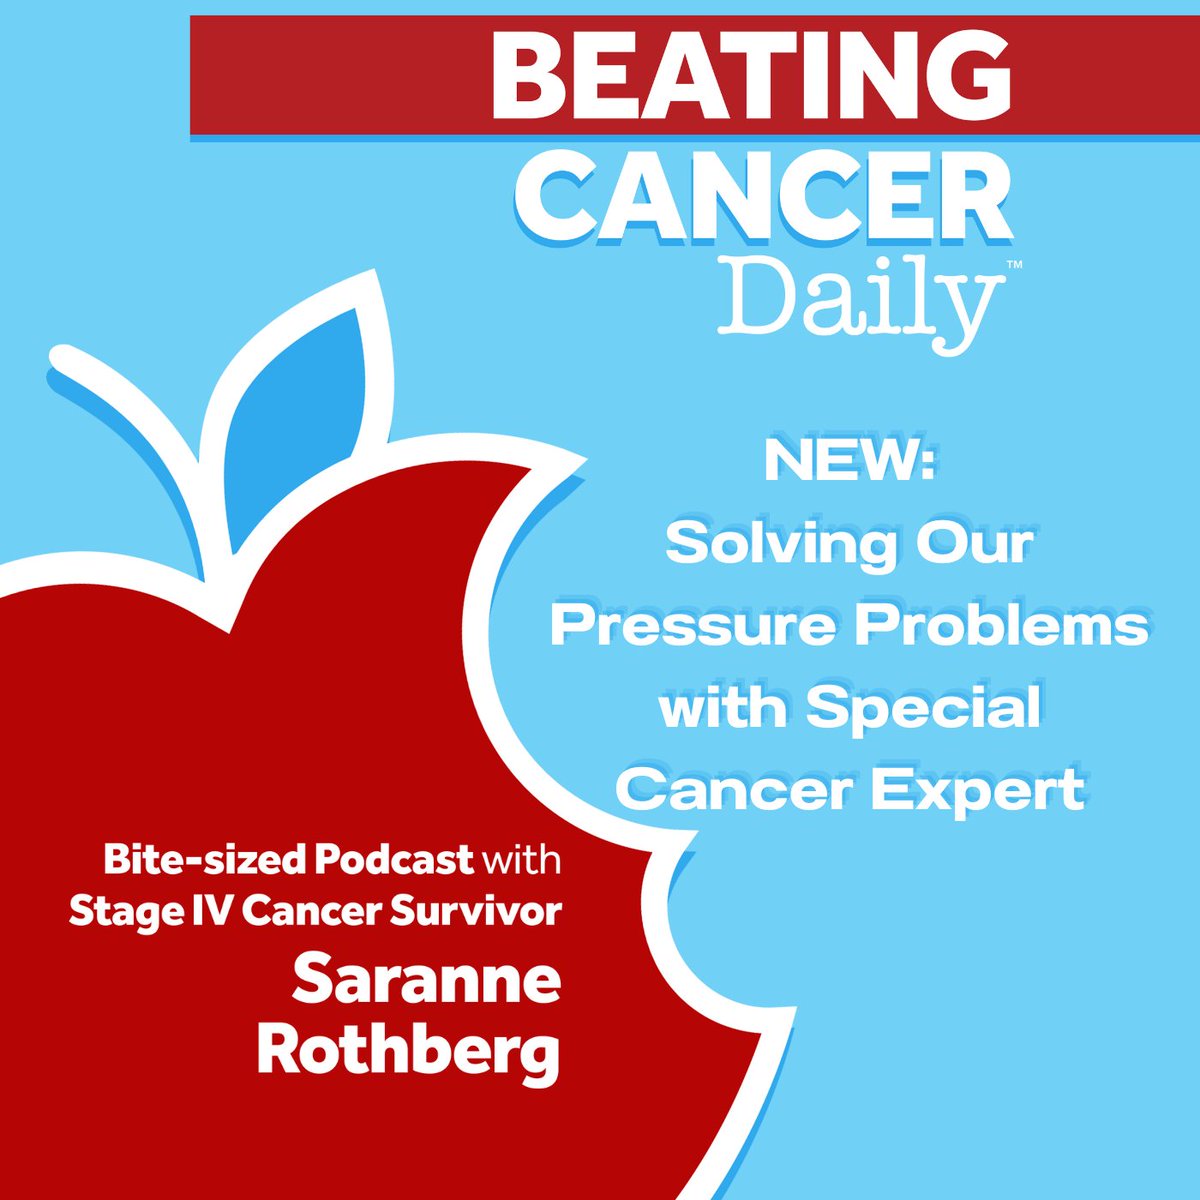 Today on #BeatingCancerDaily, NEW: Solving Our Pressure Problems with Special Cancer Expert 
Listen wherever you listen to podcasts. 
ComedyCures.org

#ComedyCures #LaughDaily #InstaLaugh #laughtherapy #NonProfit #nonprofitlife #standupcomedian #survivor #remission